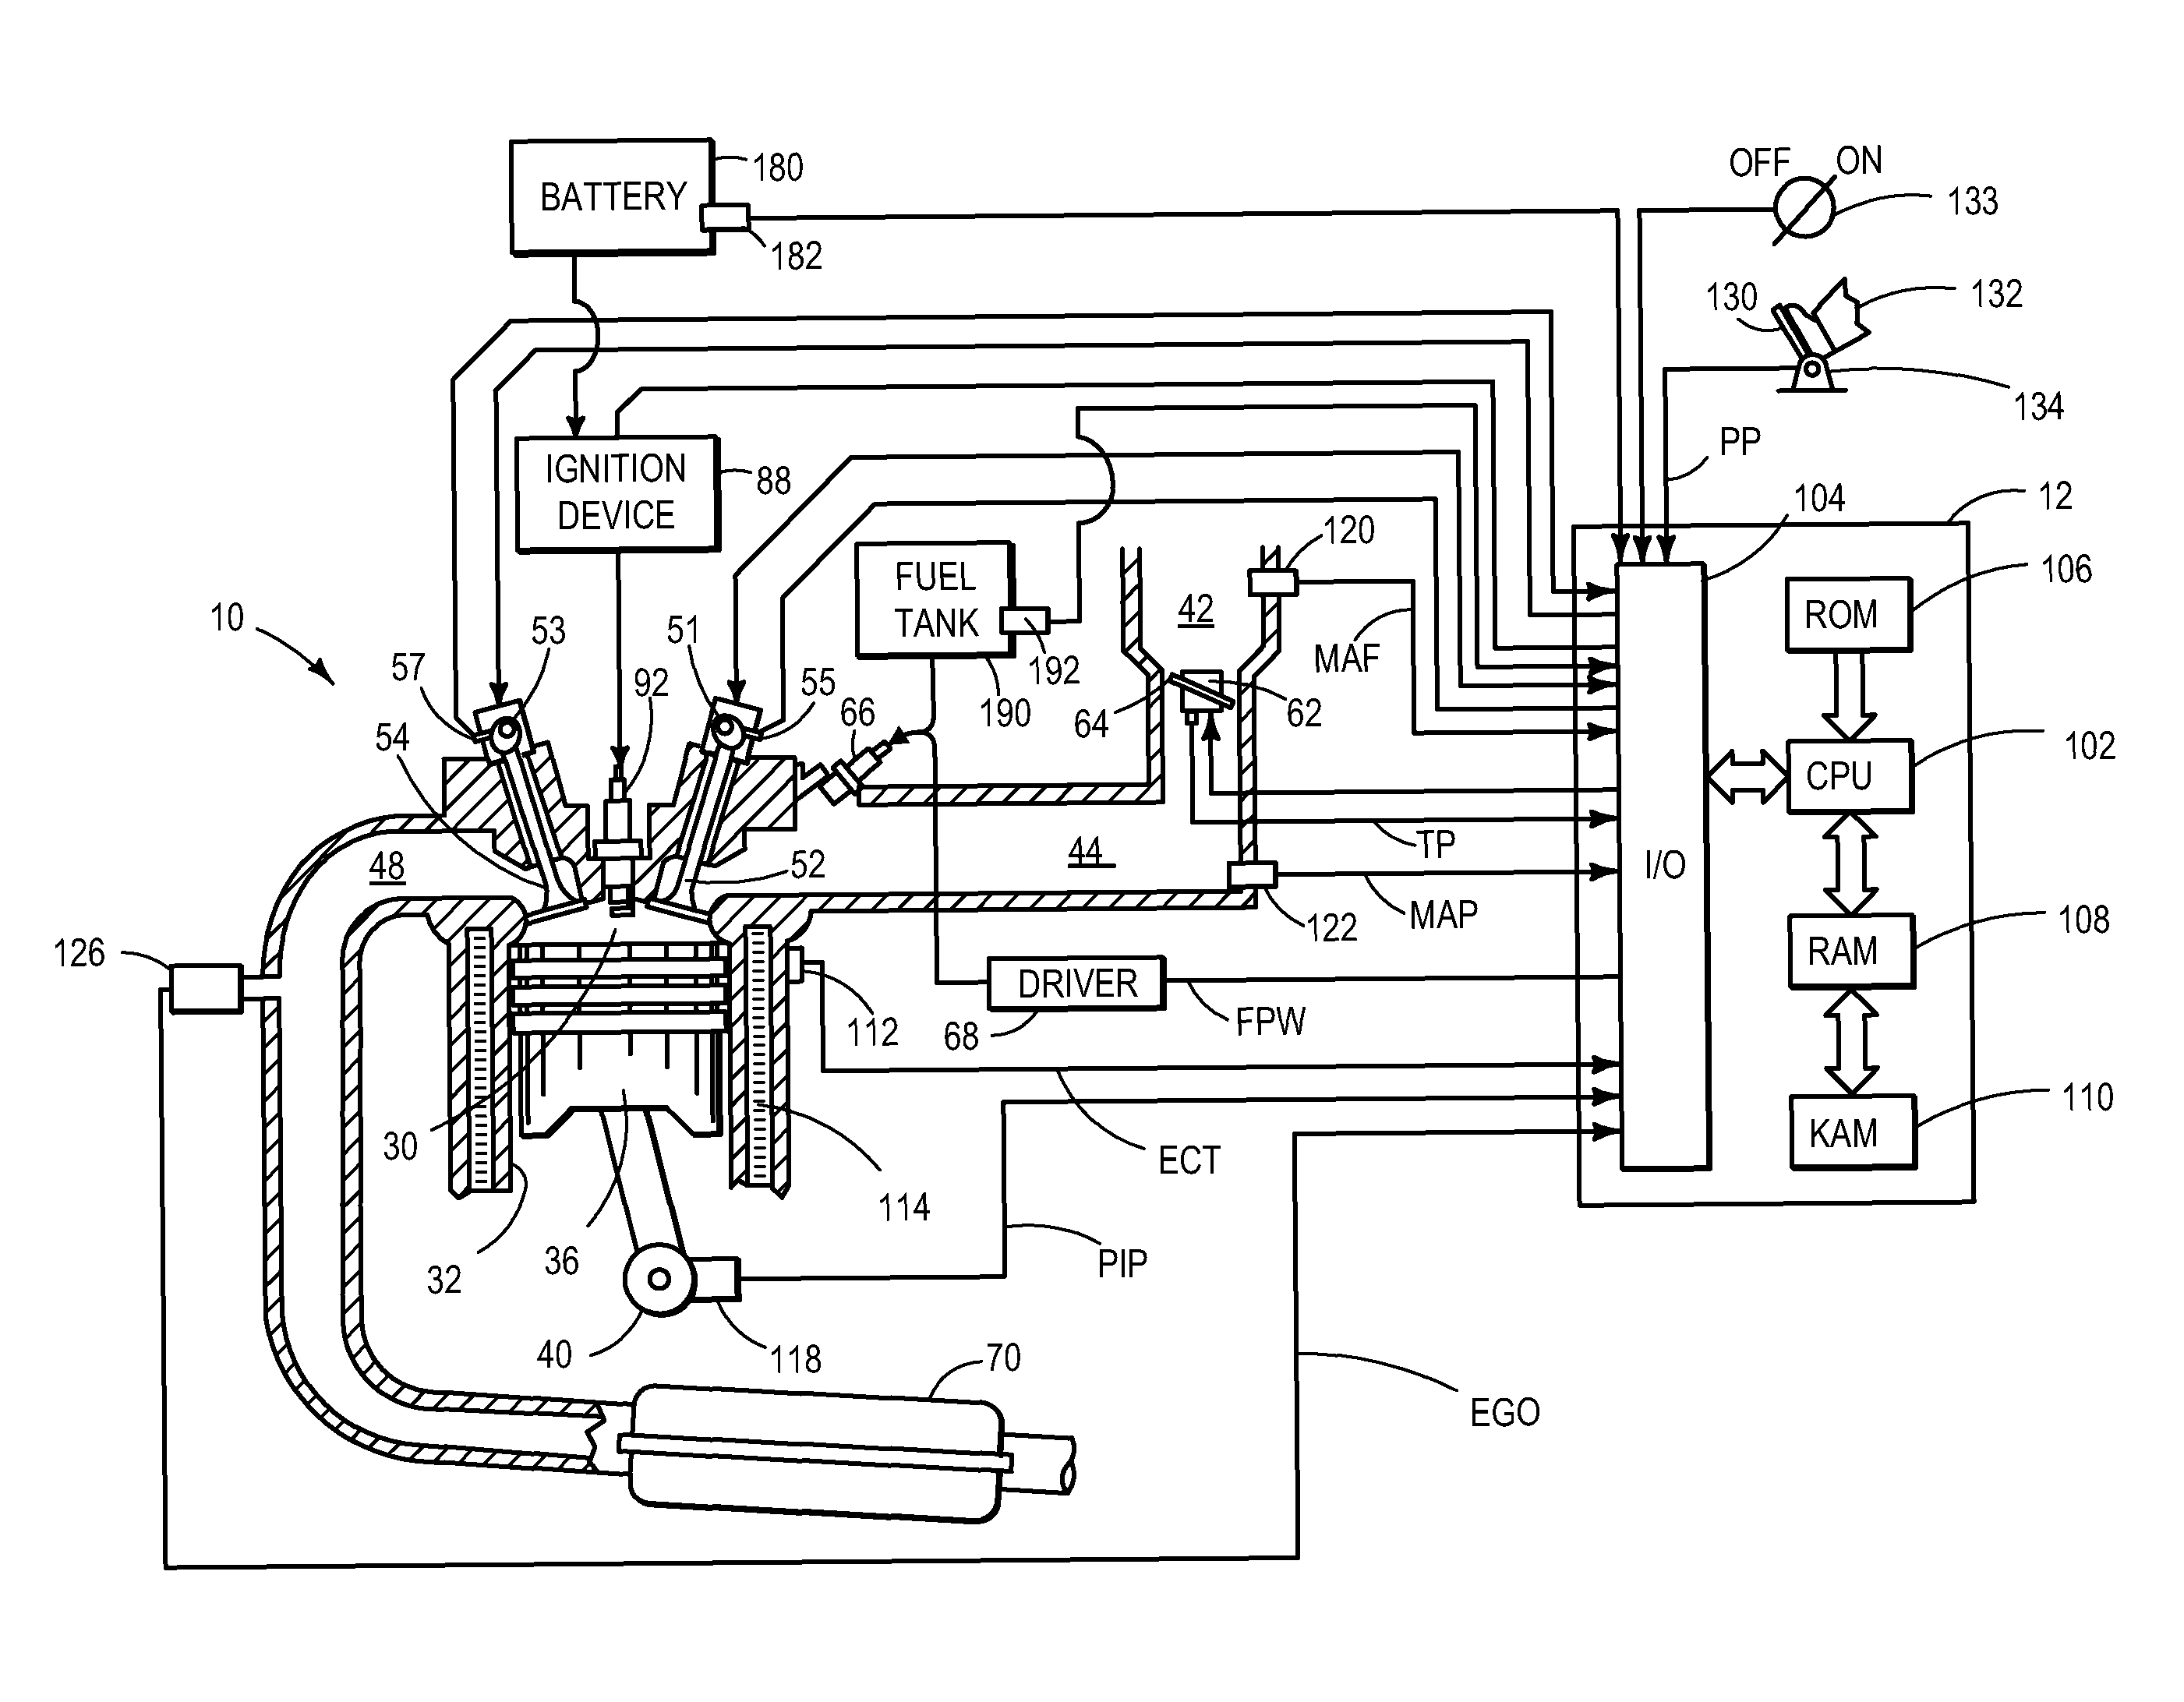 Ignition energy control for mixed fuel engine